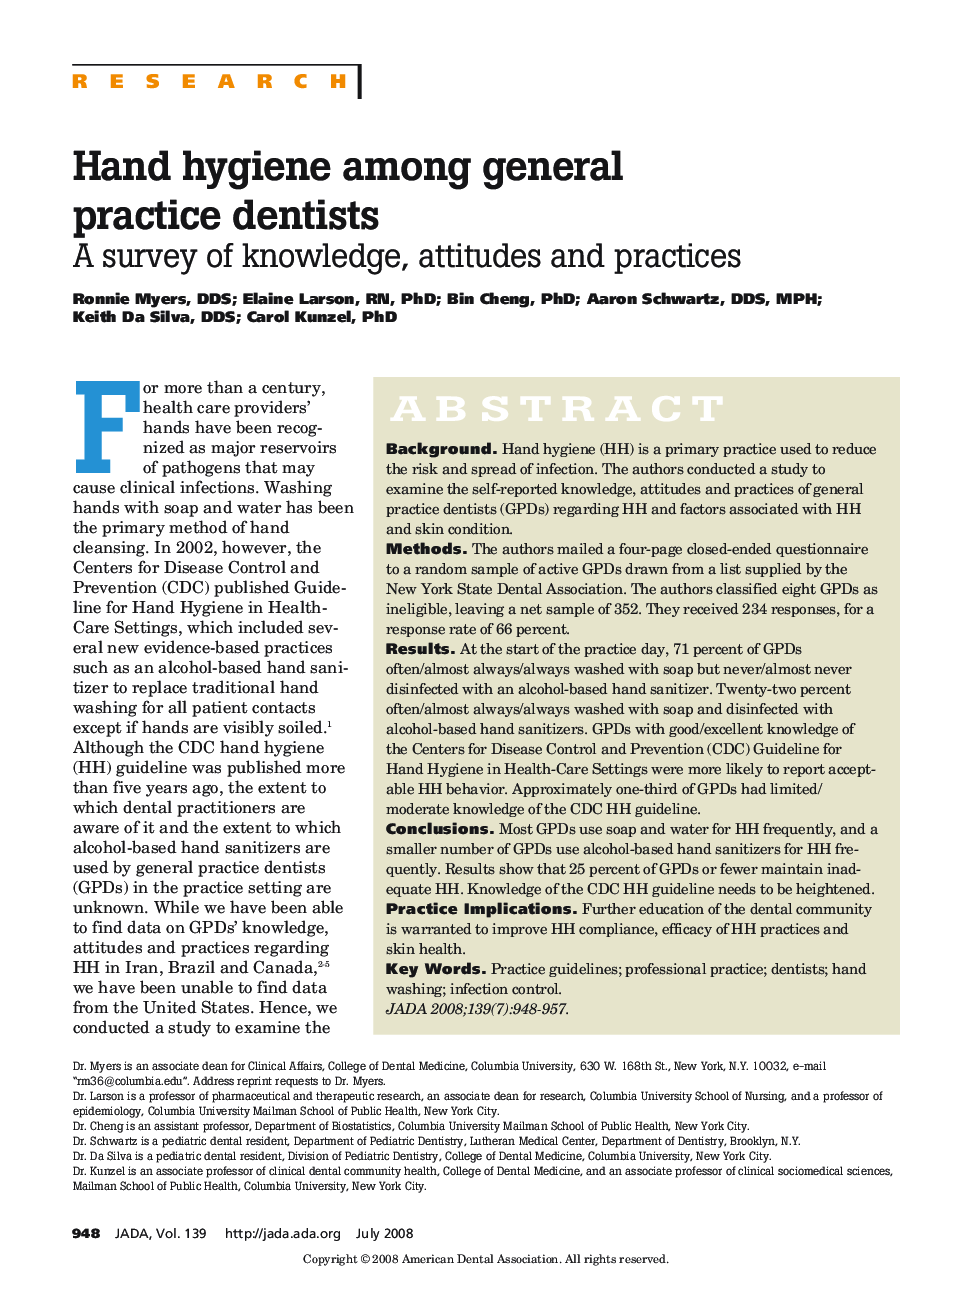 Hand Hygiene Among General Practice Dentists